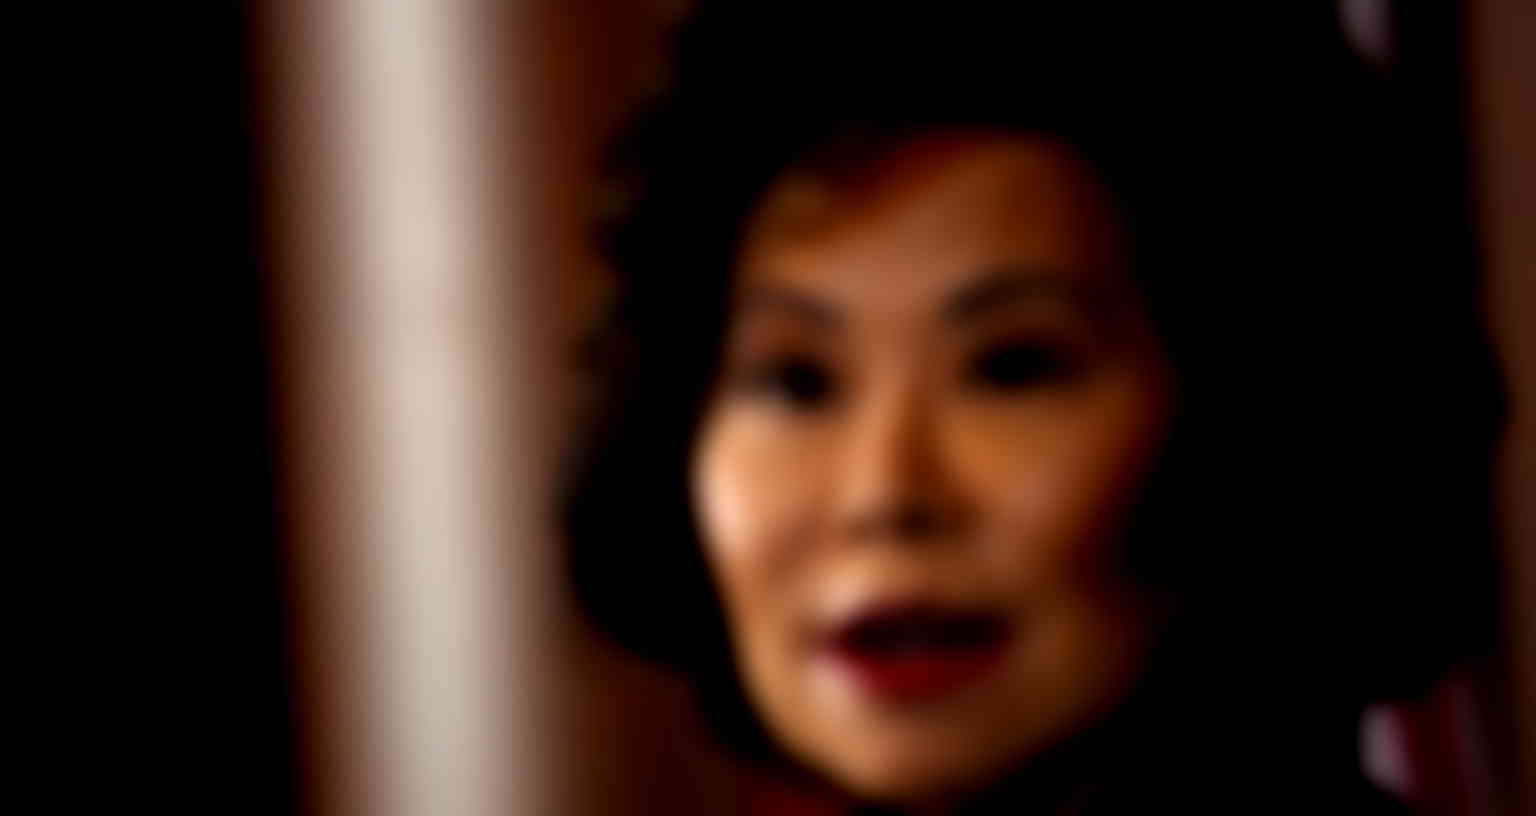 Secretary of Transportation Elaine Chao Resigns Following Riot on Capitol Hill